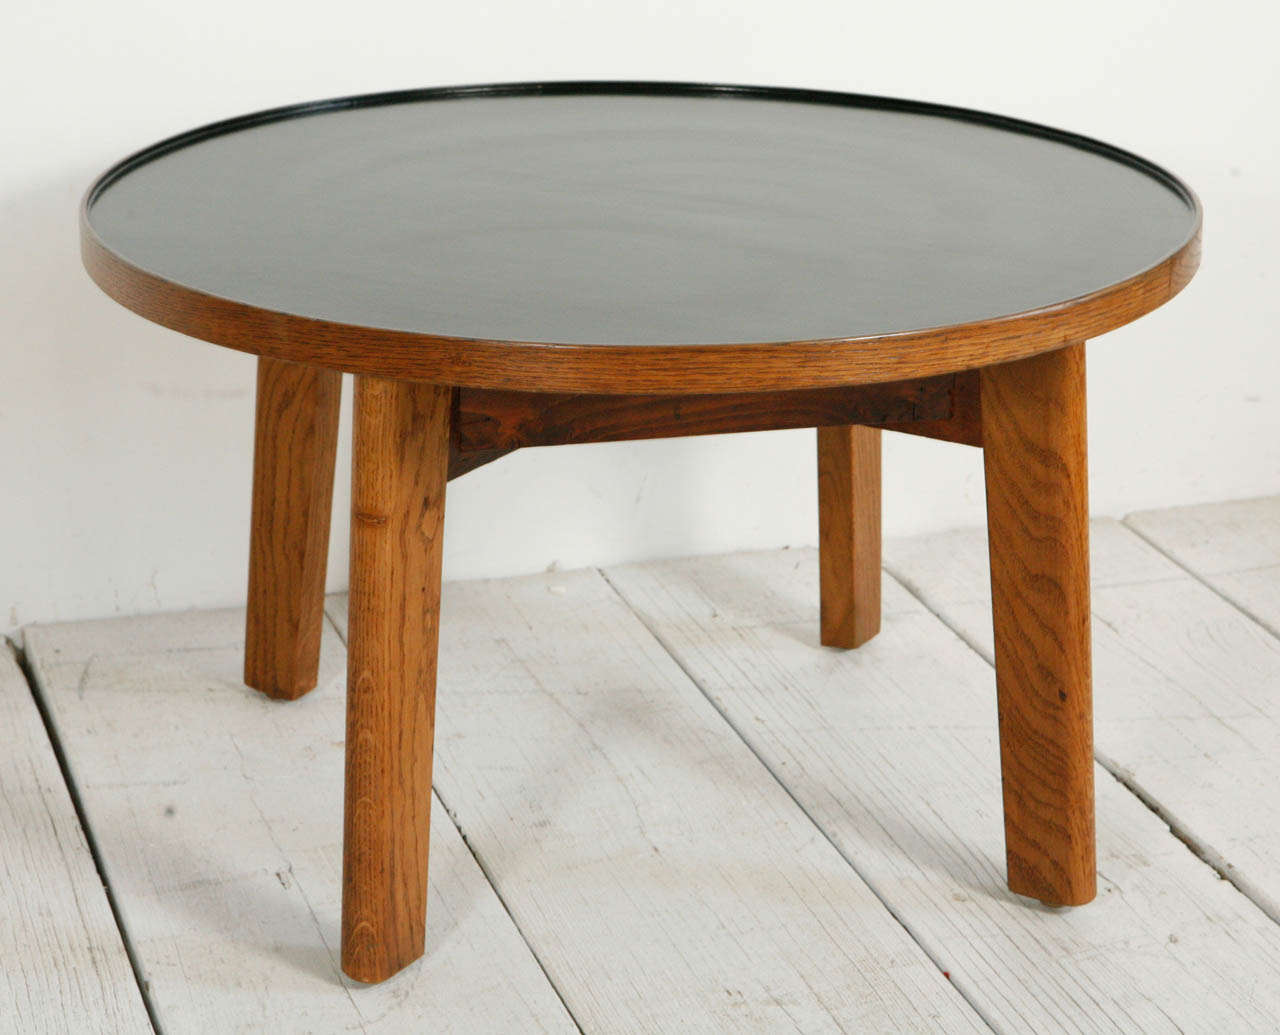 Handsome round oak accent table with black top.